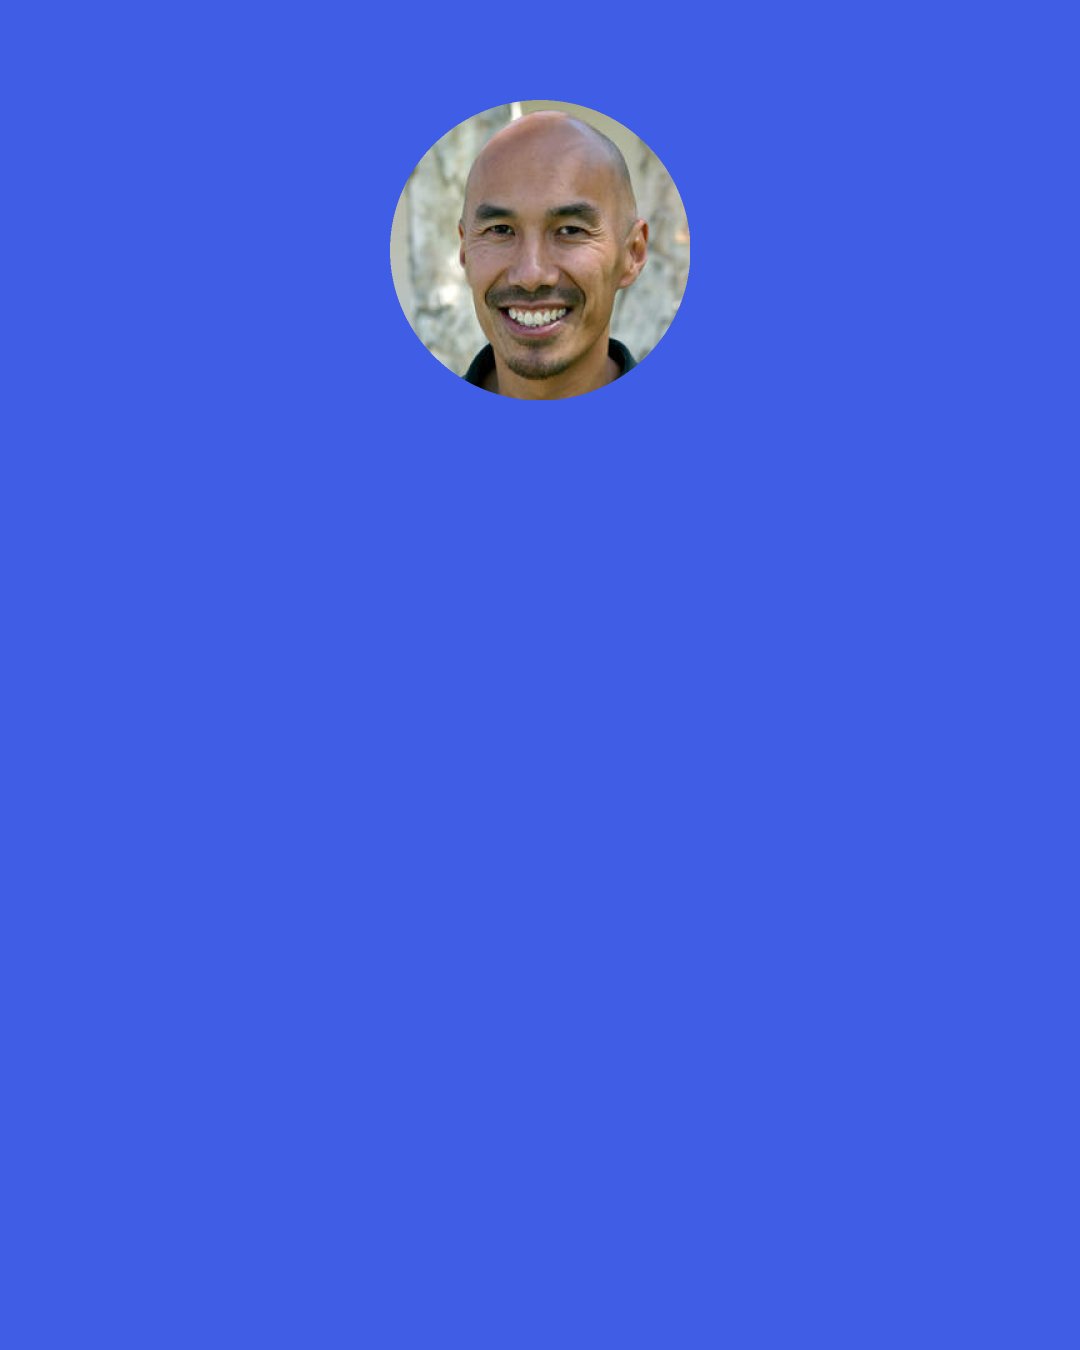 Francis Chan: I am just an earthly sinful father & I love my kids so much it hurts. How could I not trust a heavenly, perfect Father who loves me infinitely more than I will ever love my kids?